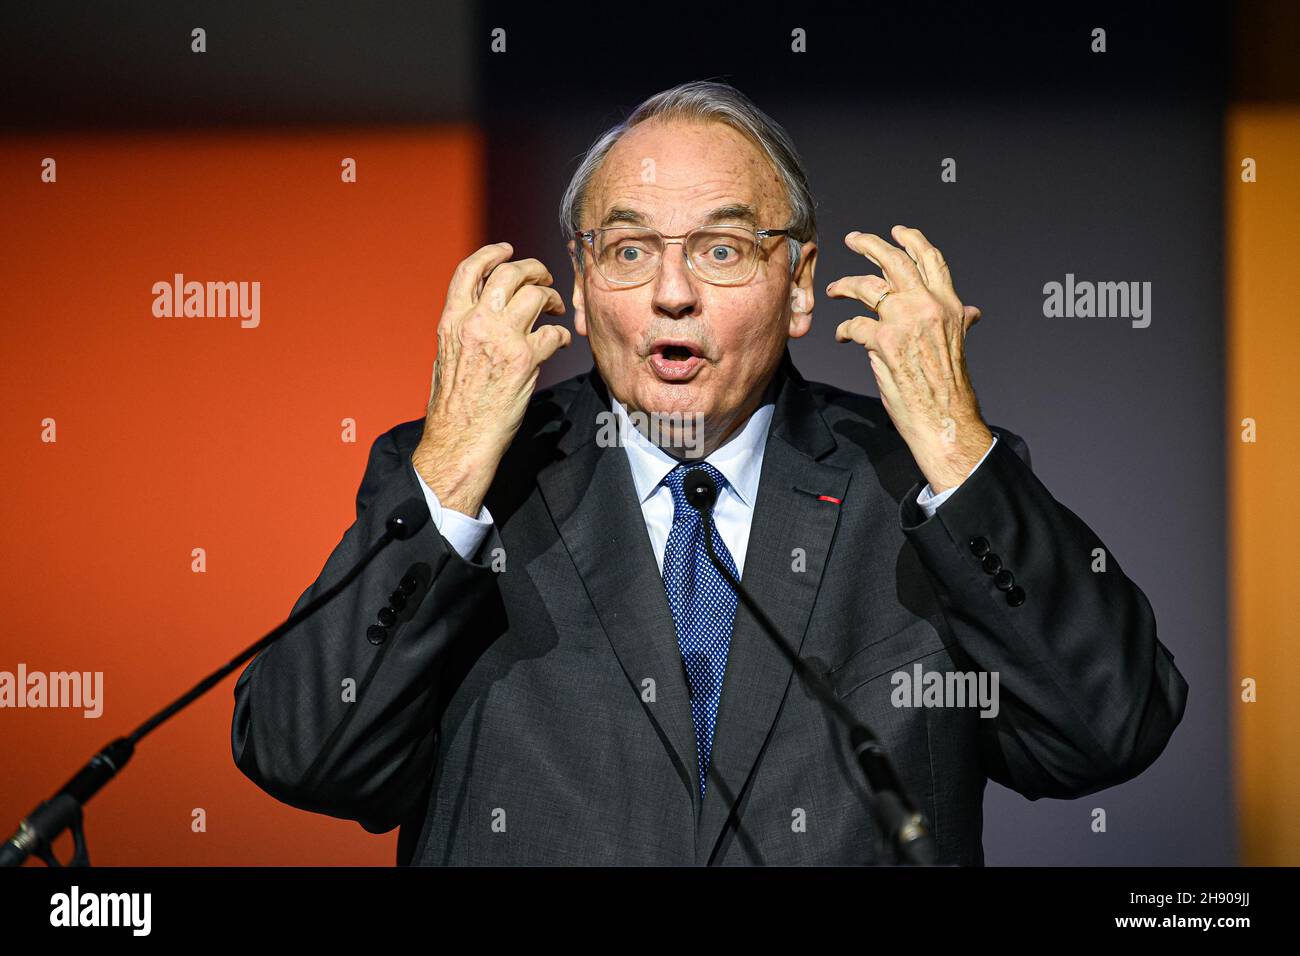 French deputy Jean-Louis Bourlanges during the 80th anniversary ceremony of  French Development Agency ("Agence francaise de developpement", AFD), at t  Stock Photo - Alamy